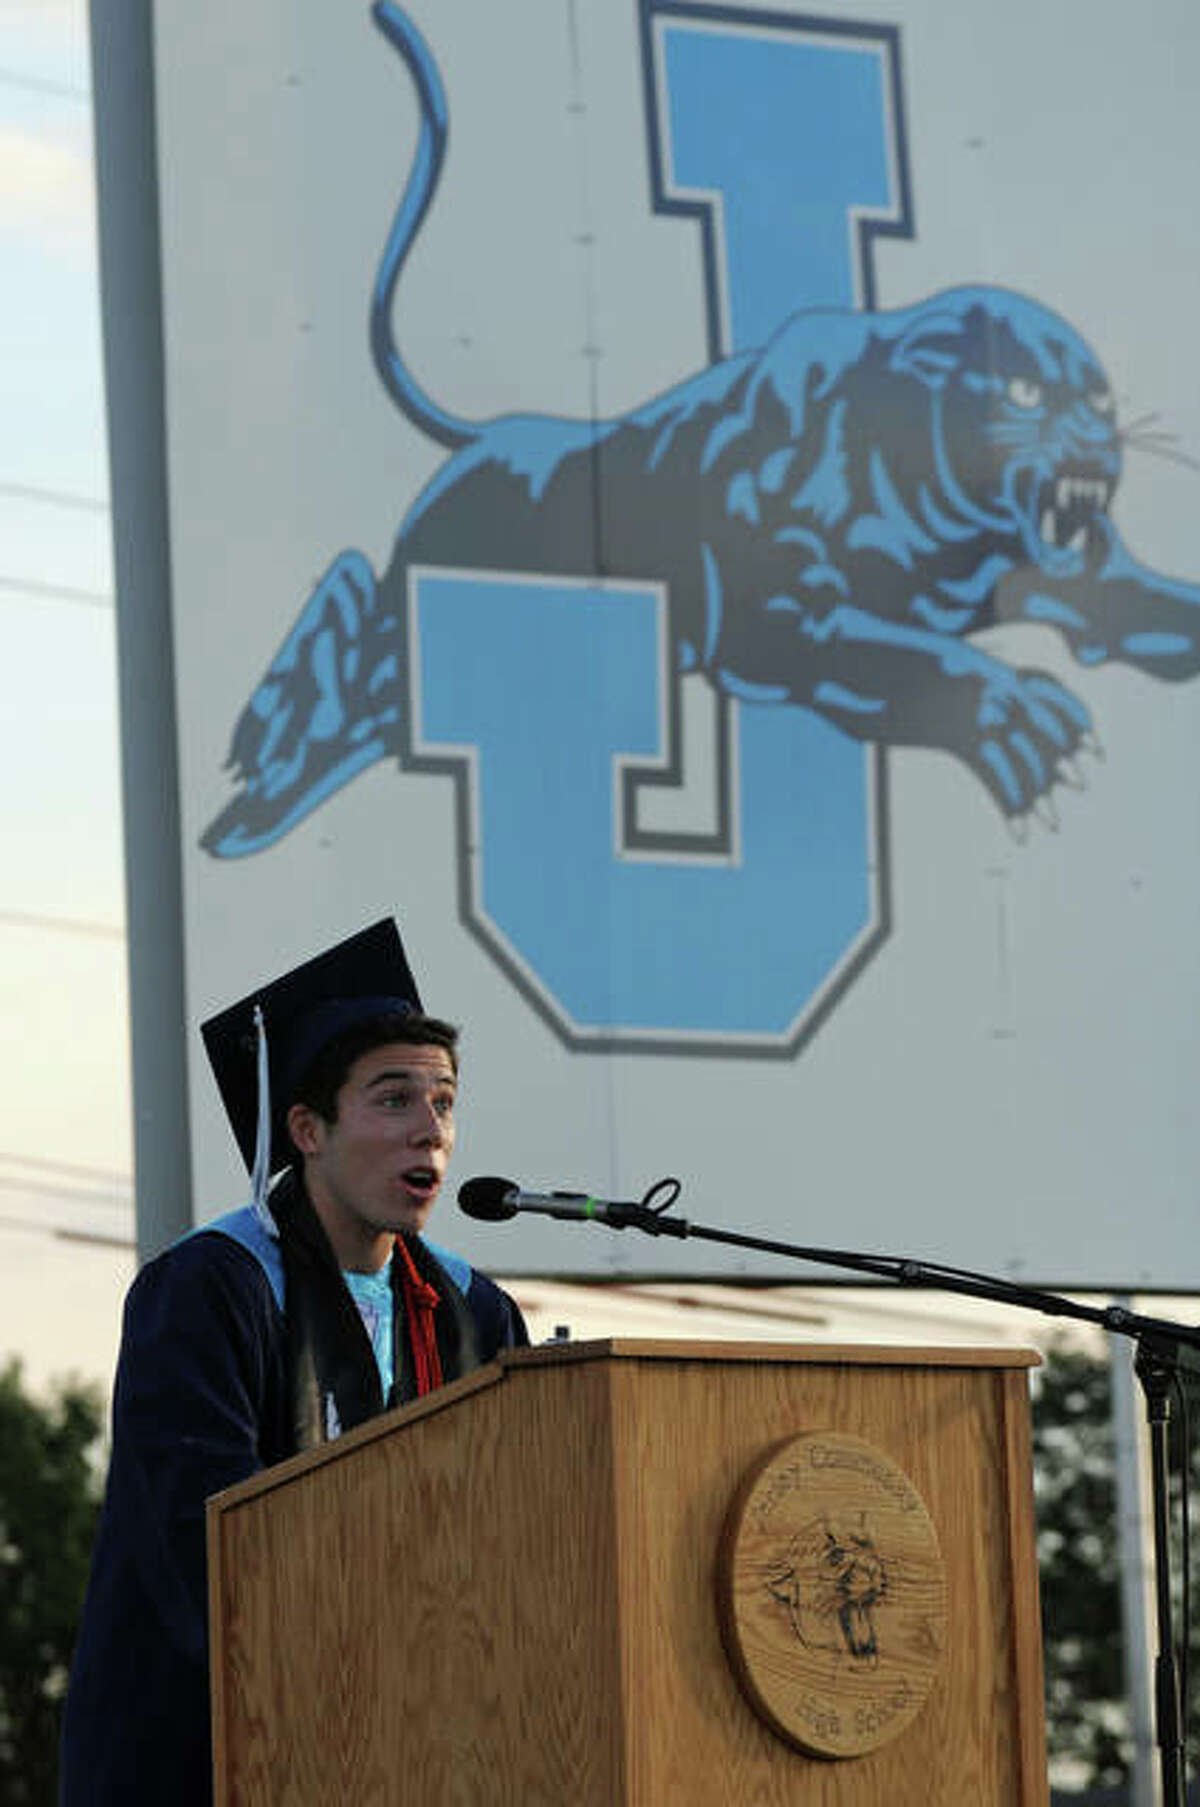 Grant Morgan gives the commencement address on behalf of his fellow Jerseyville High School graduates.